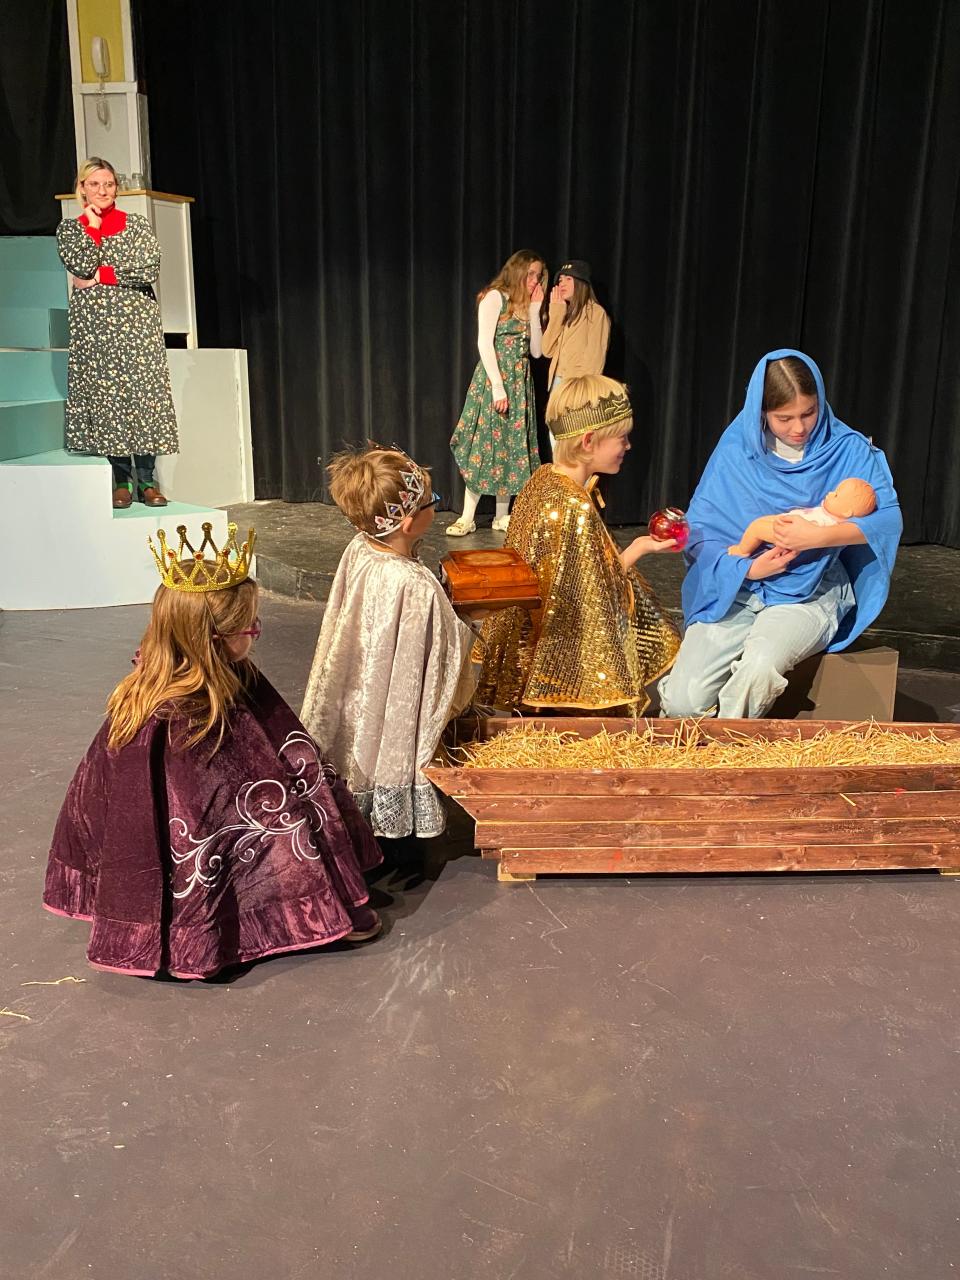 Cast members from "The Best Christmas Pageant Ever" include, front, left to right, Camille Evans, Paxton Glidden, Charlie Tobin, Calla Pearson and back row, left to right, Sam Park, Maddy Hilley and Mia Nadeau.